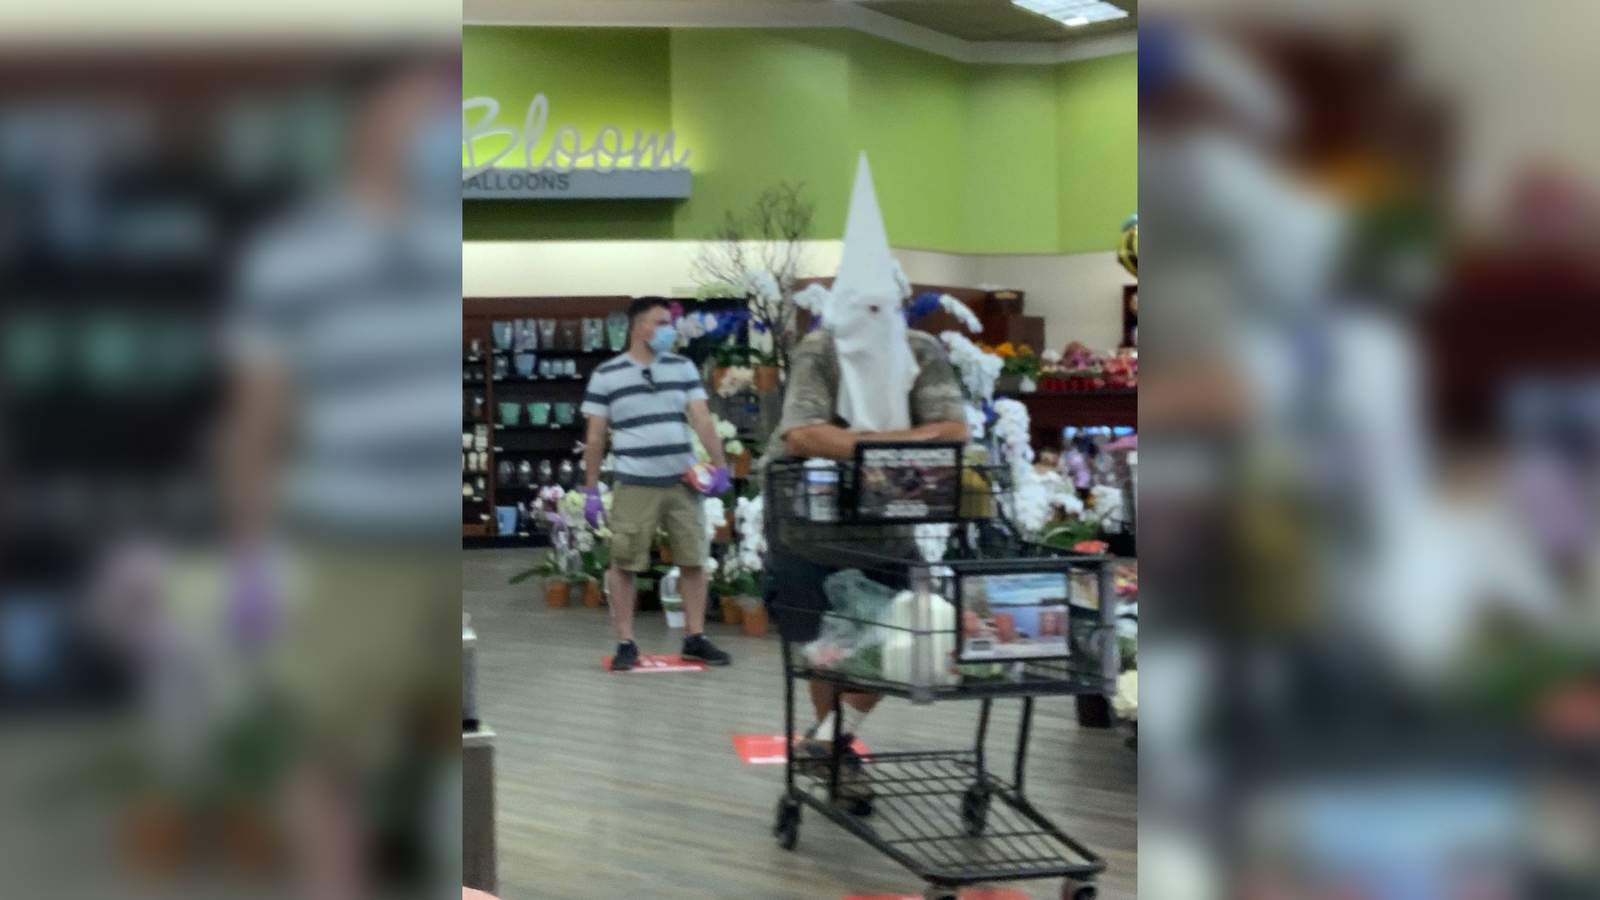 A man wore what appeared to be a KKK white hood on a trip to the grocery store